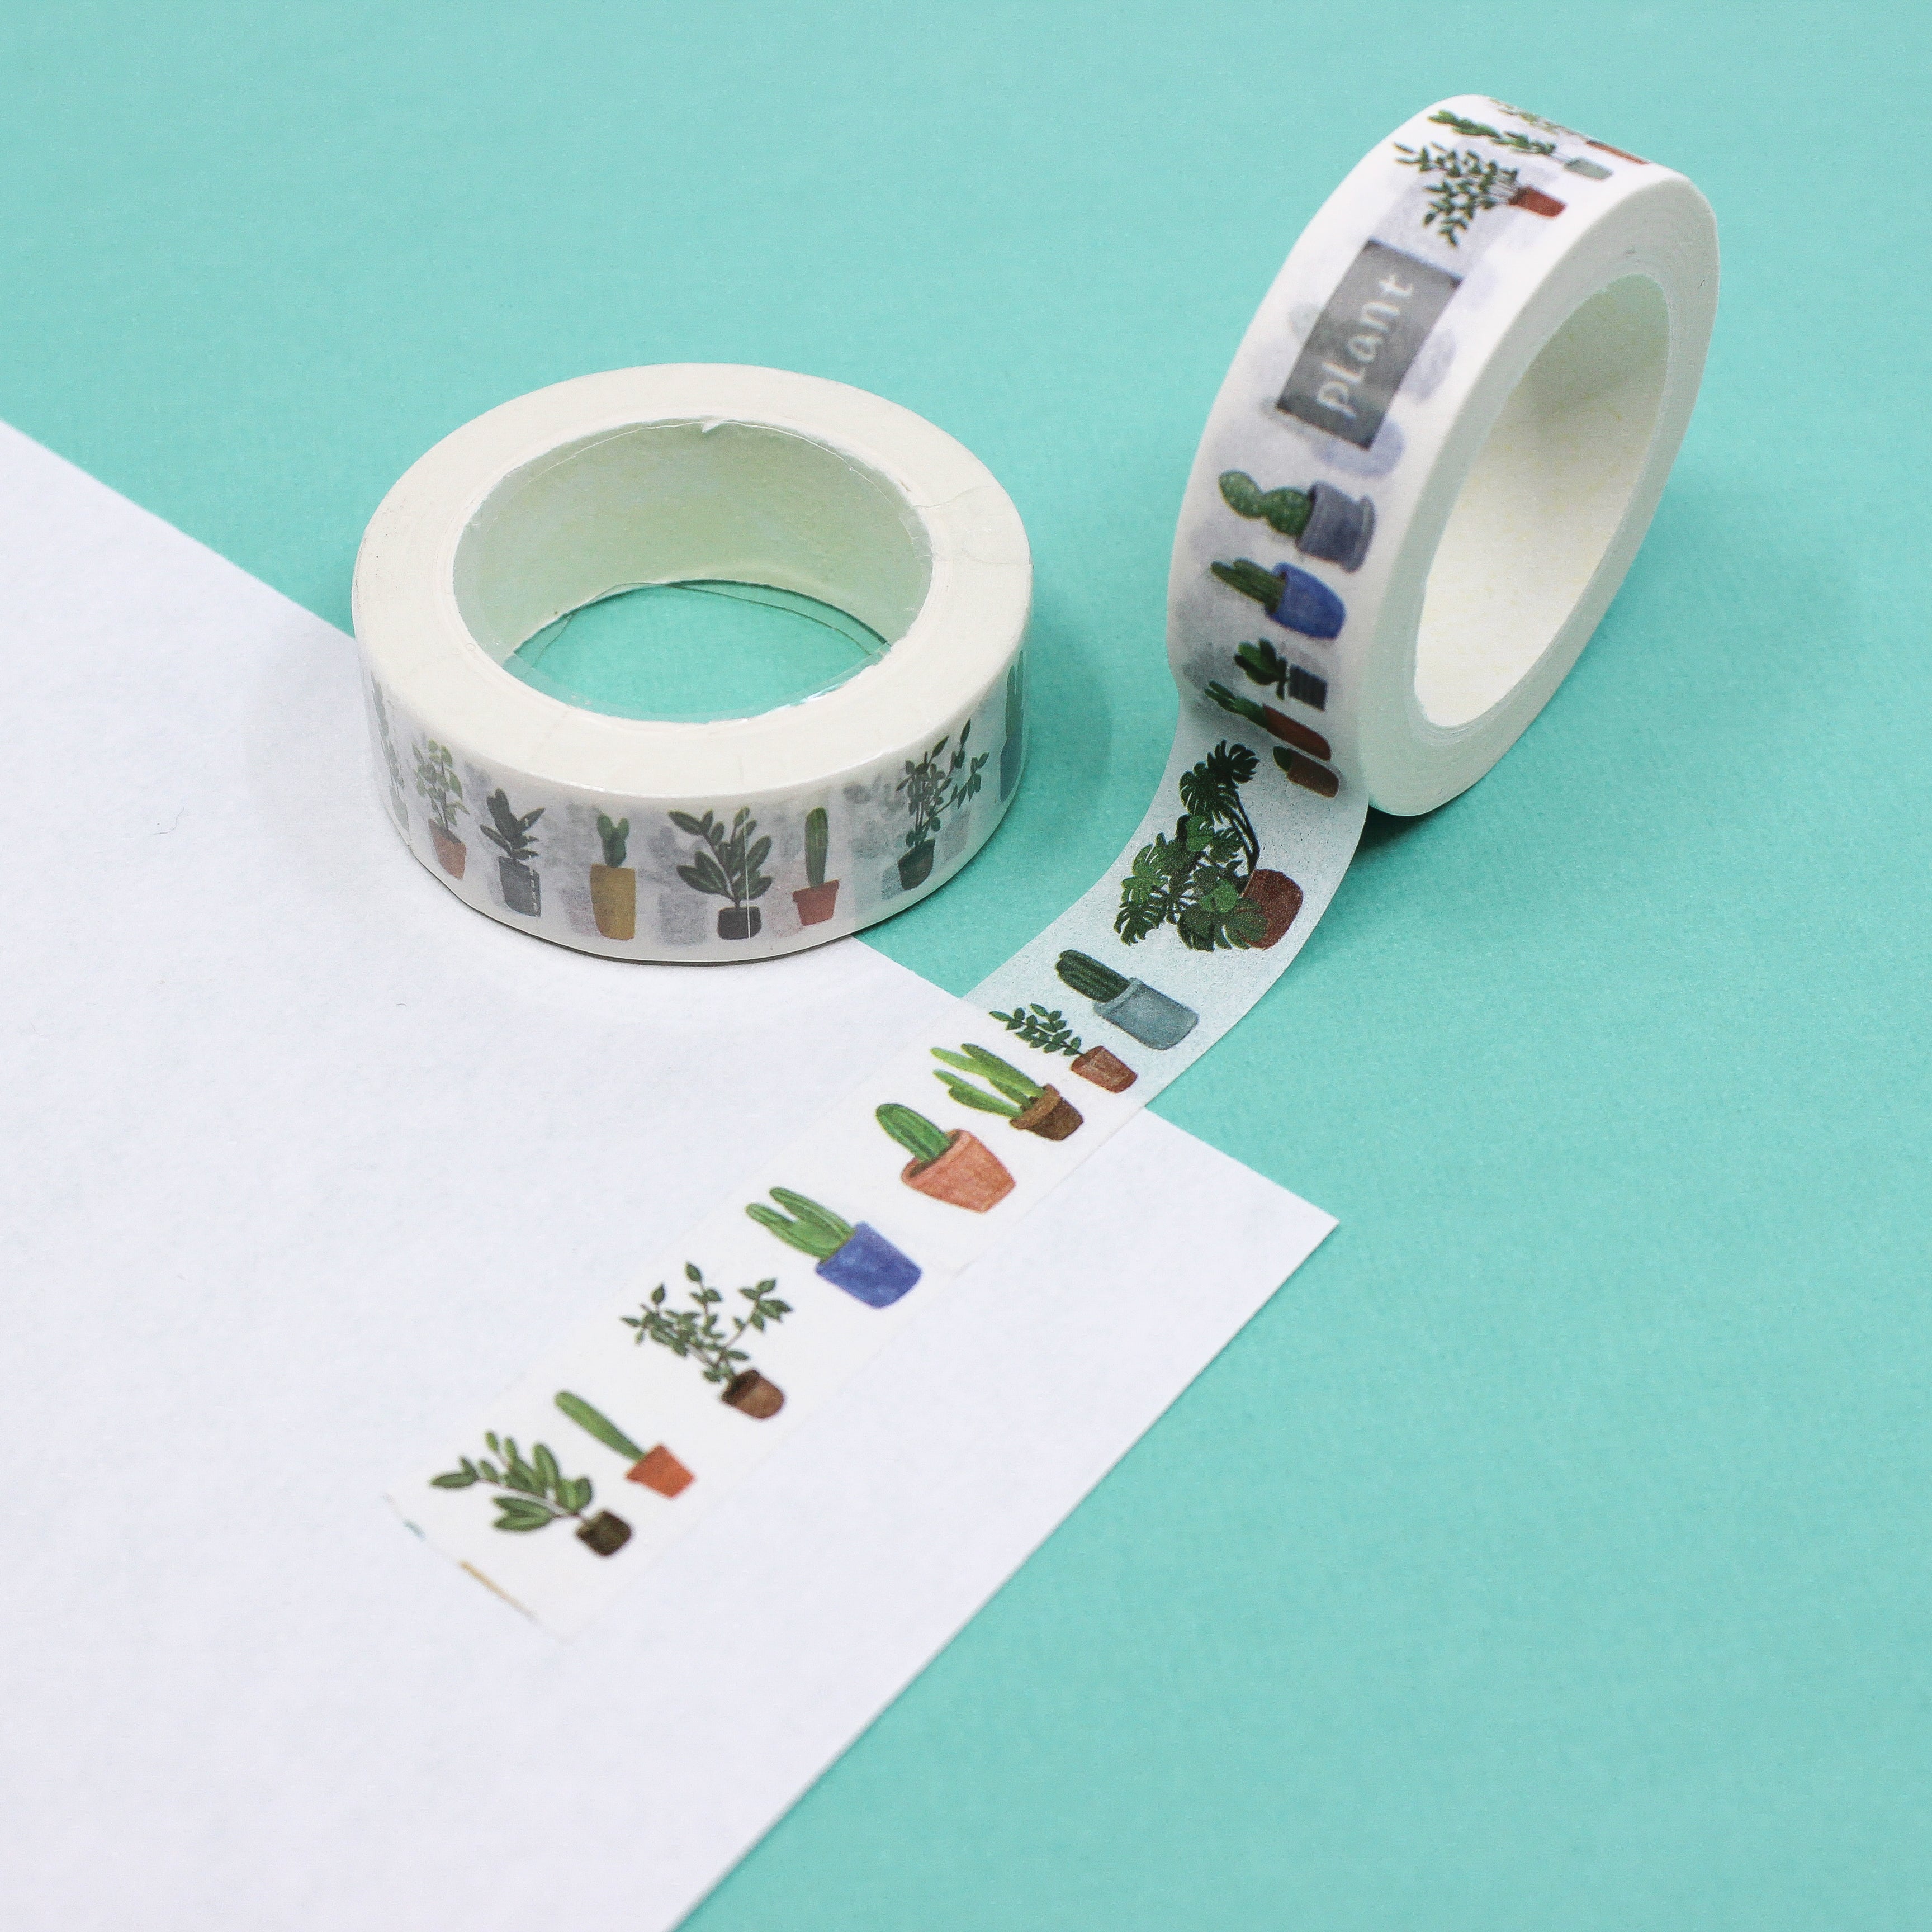 Bring a touch of nature indoors with our Potted Plants Washi Tape, featuring charming illustrations of potted plants. Ideal for adding a botanical and decorative accent to your projects. This tape is sold at BBB Supplies Craft Shop.